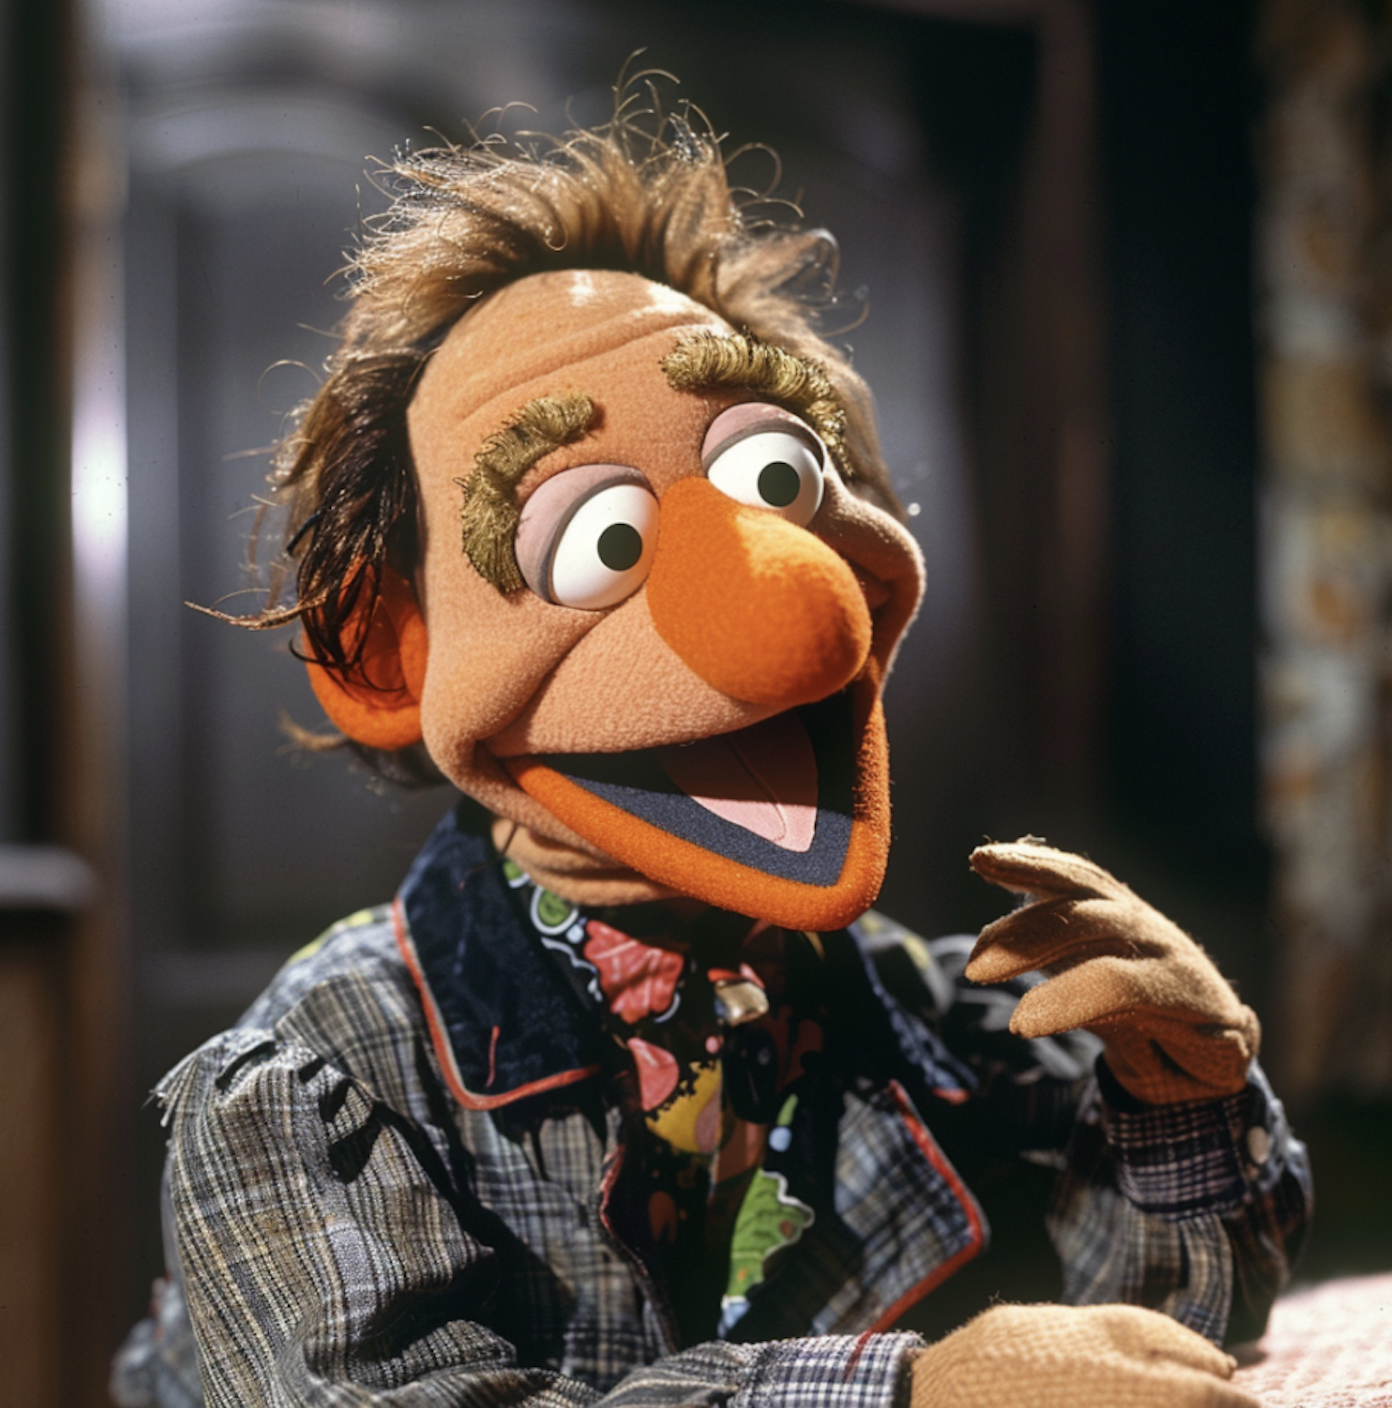 Muppet wearing a plaid jacket and a paisley tie, smiling